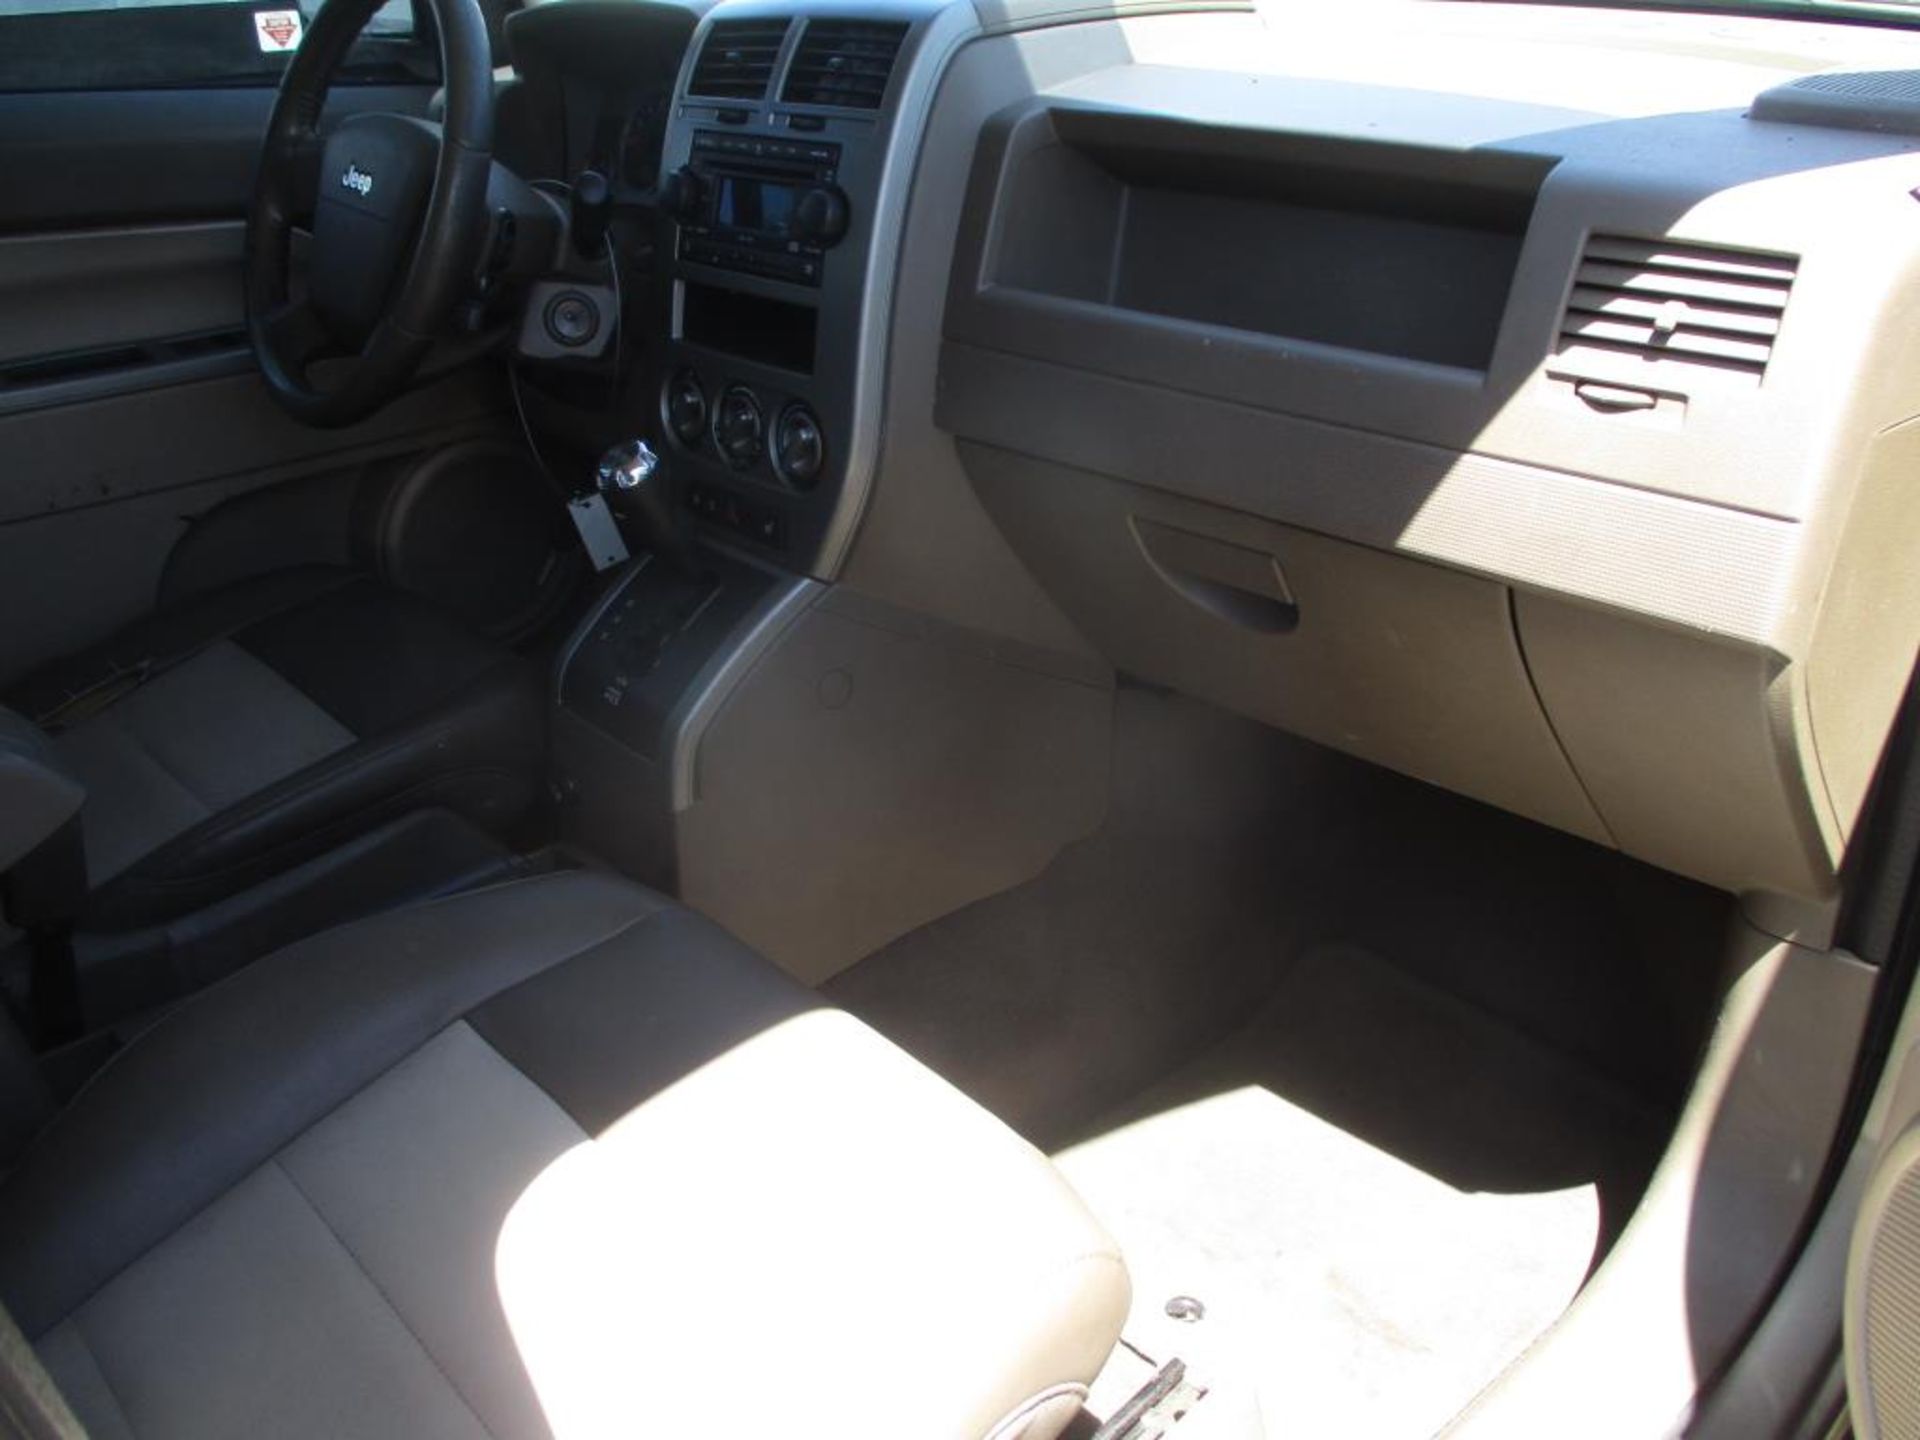 2007 Jeep Compass - Image 5 of 10